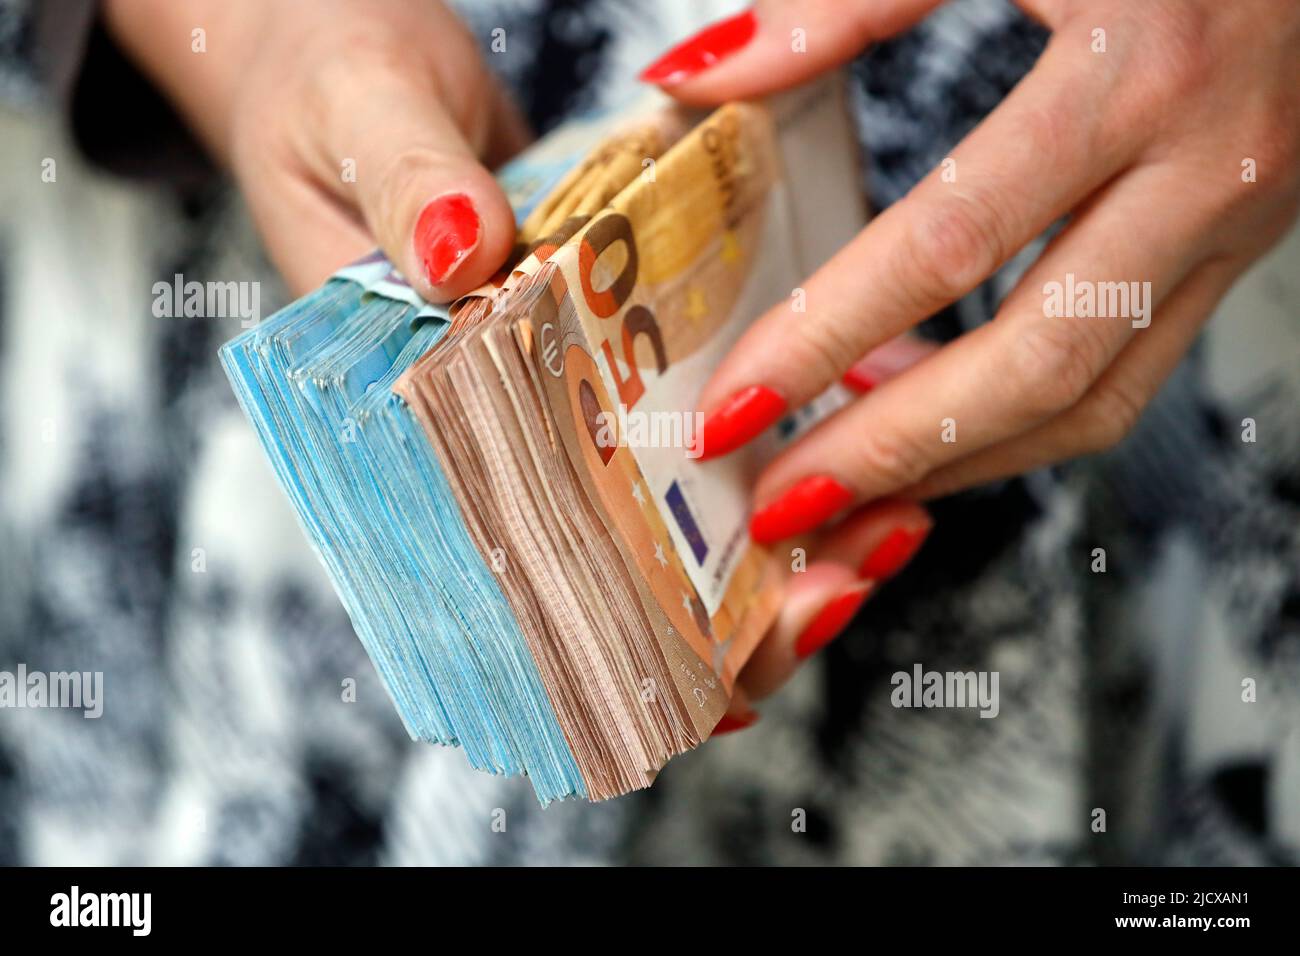 Woman holding euro money banknotes, concept of stealing cash, rich people, savings or spending money, counting payment, France, Europe Stock Photo